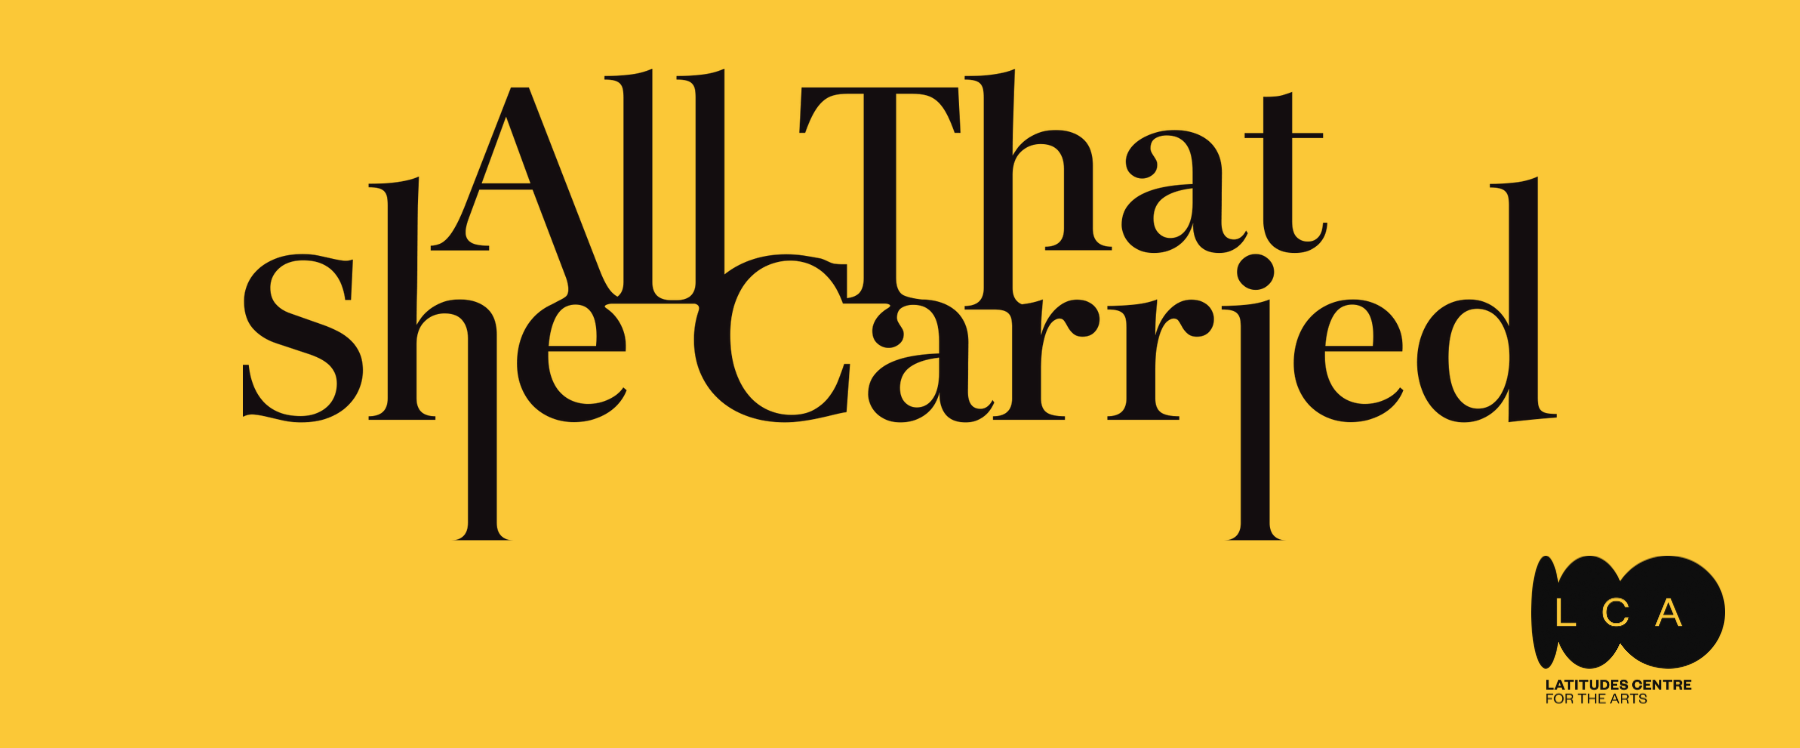 Latitudes Centre for the Arts | All That She Carried